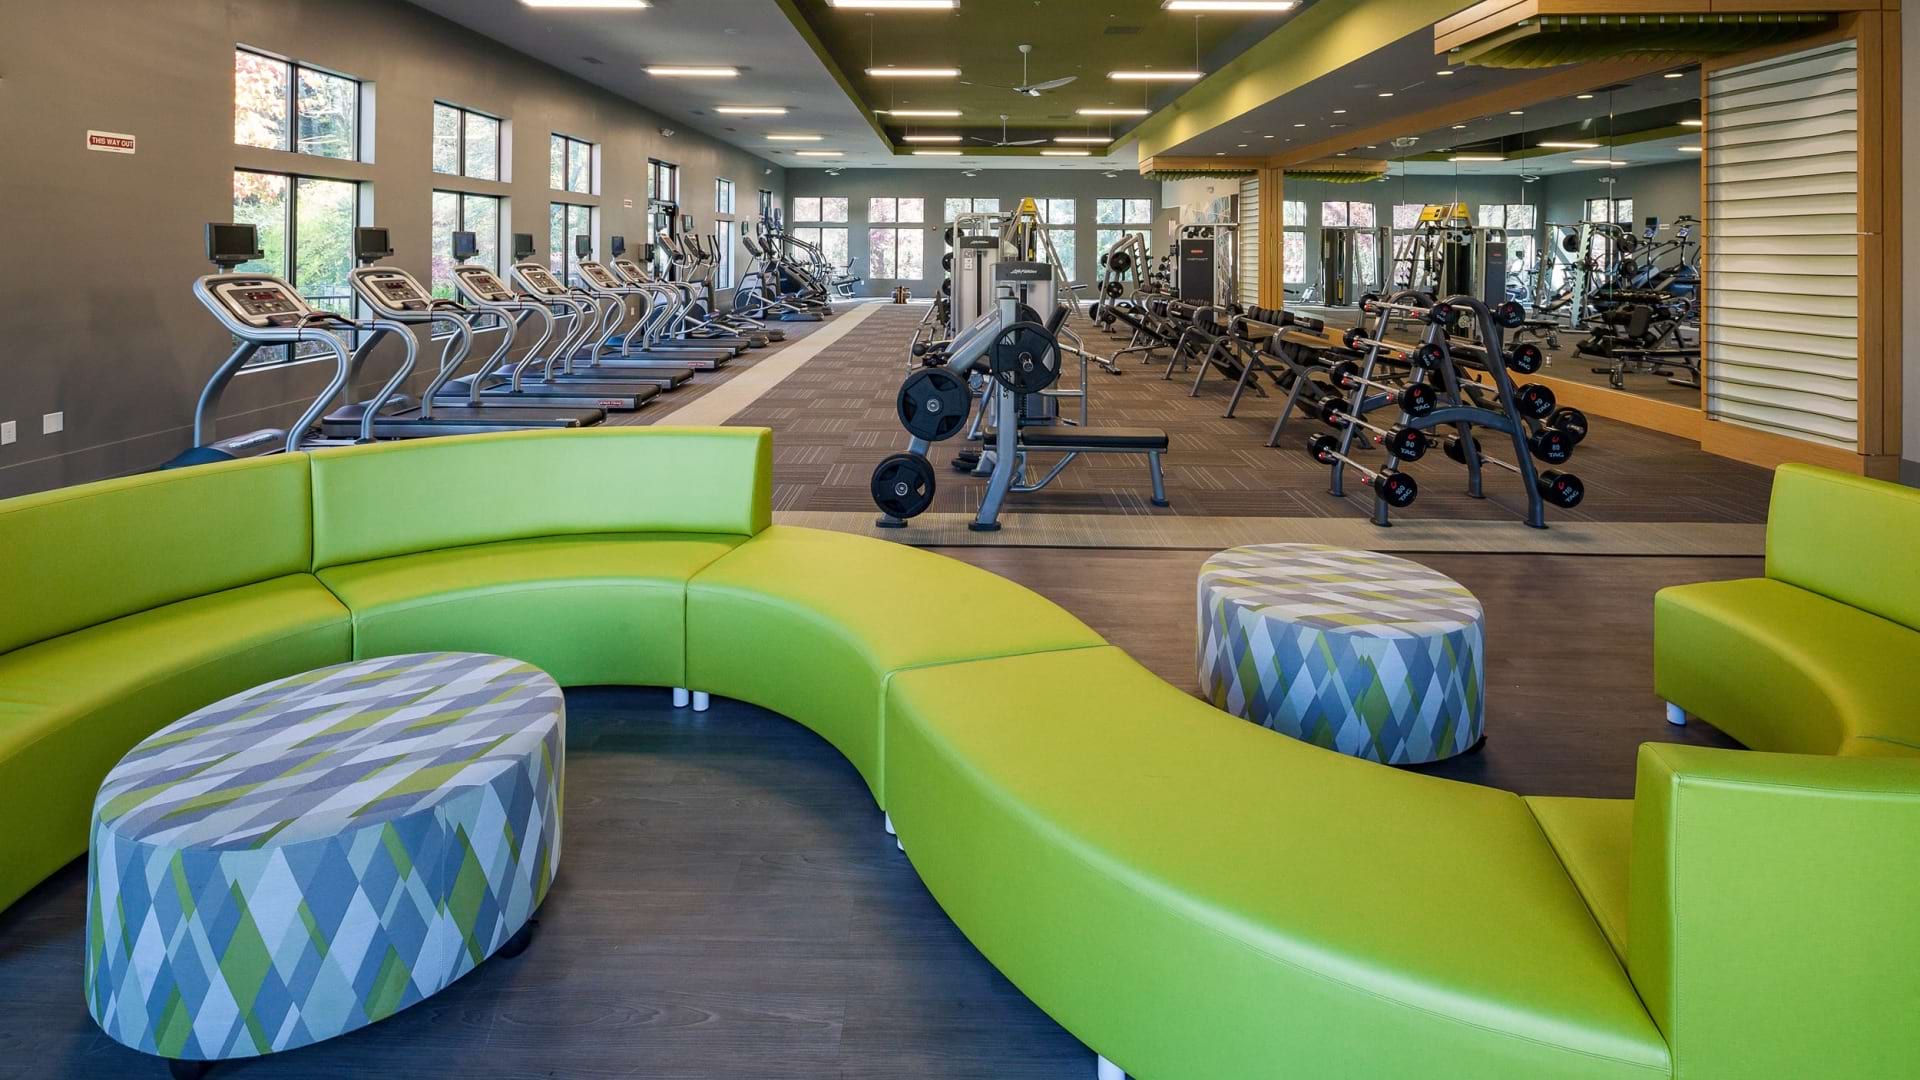 Fitness equipment and lounge area at our Lake Village East apartment gym